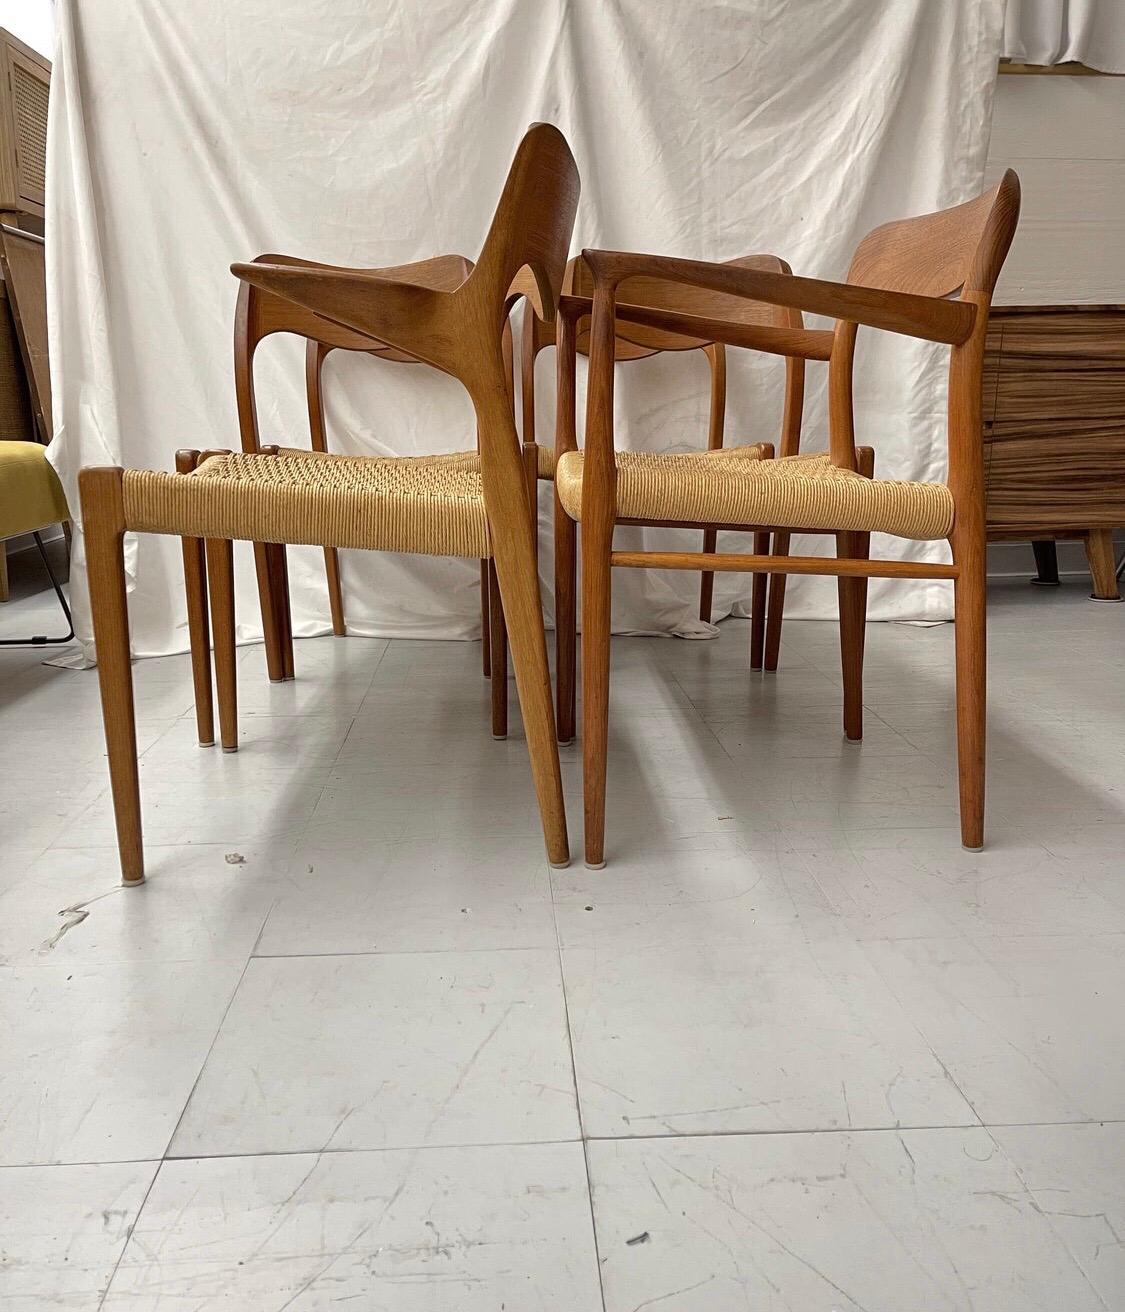 Mid-20th Century 1960s Danish Modern Jl Moller Chairs with Caning, Set of 6